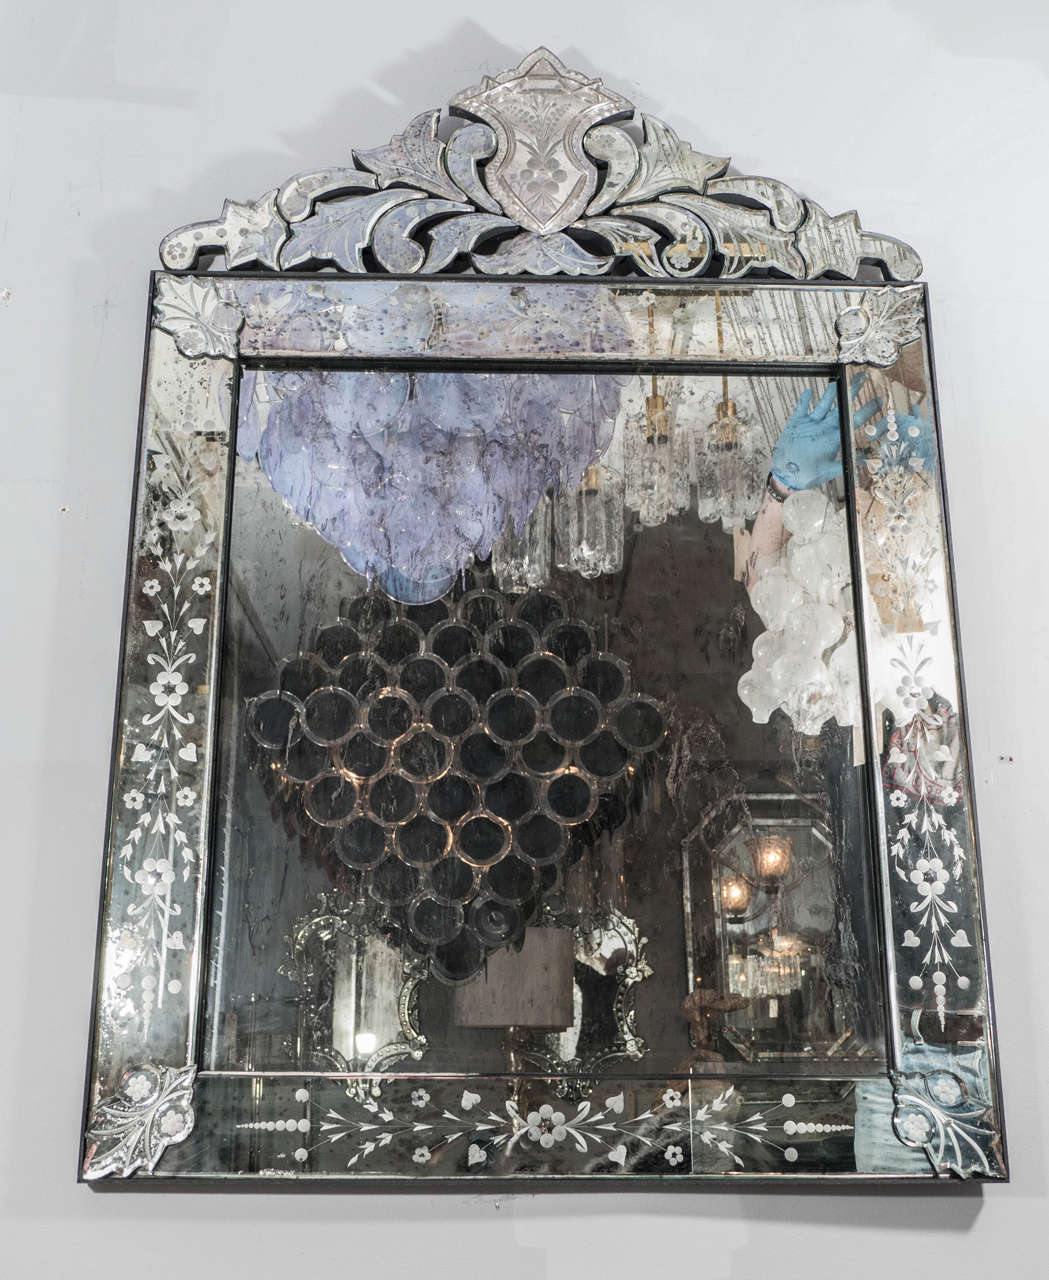 Vintage Venetian style mirror with an elaborated etched detail crown top. The mirror is antiqued with aged silvering finish.